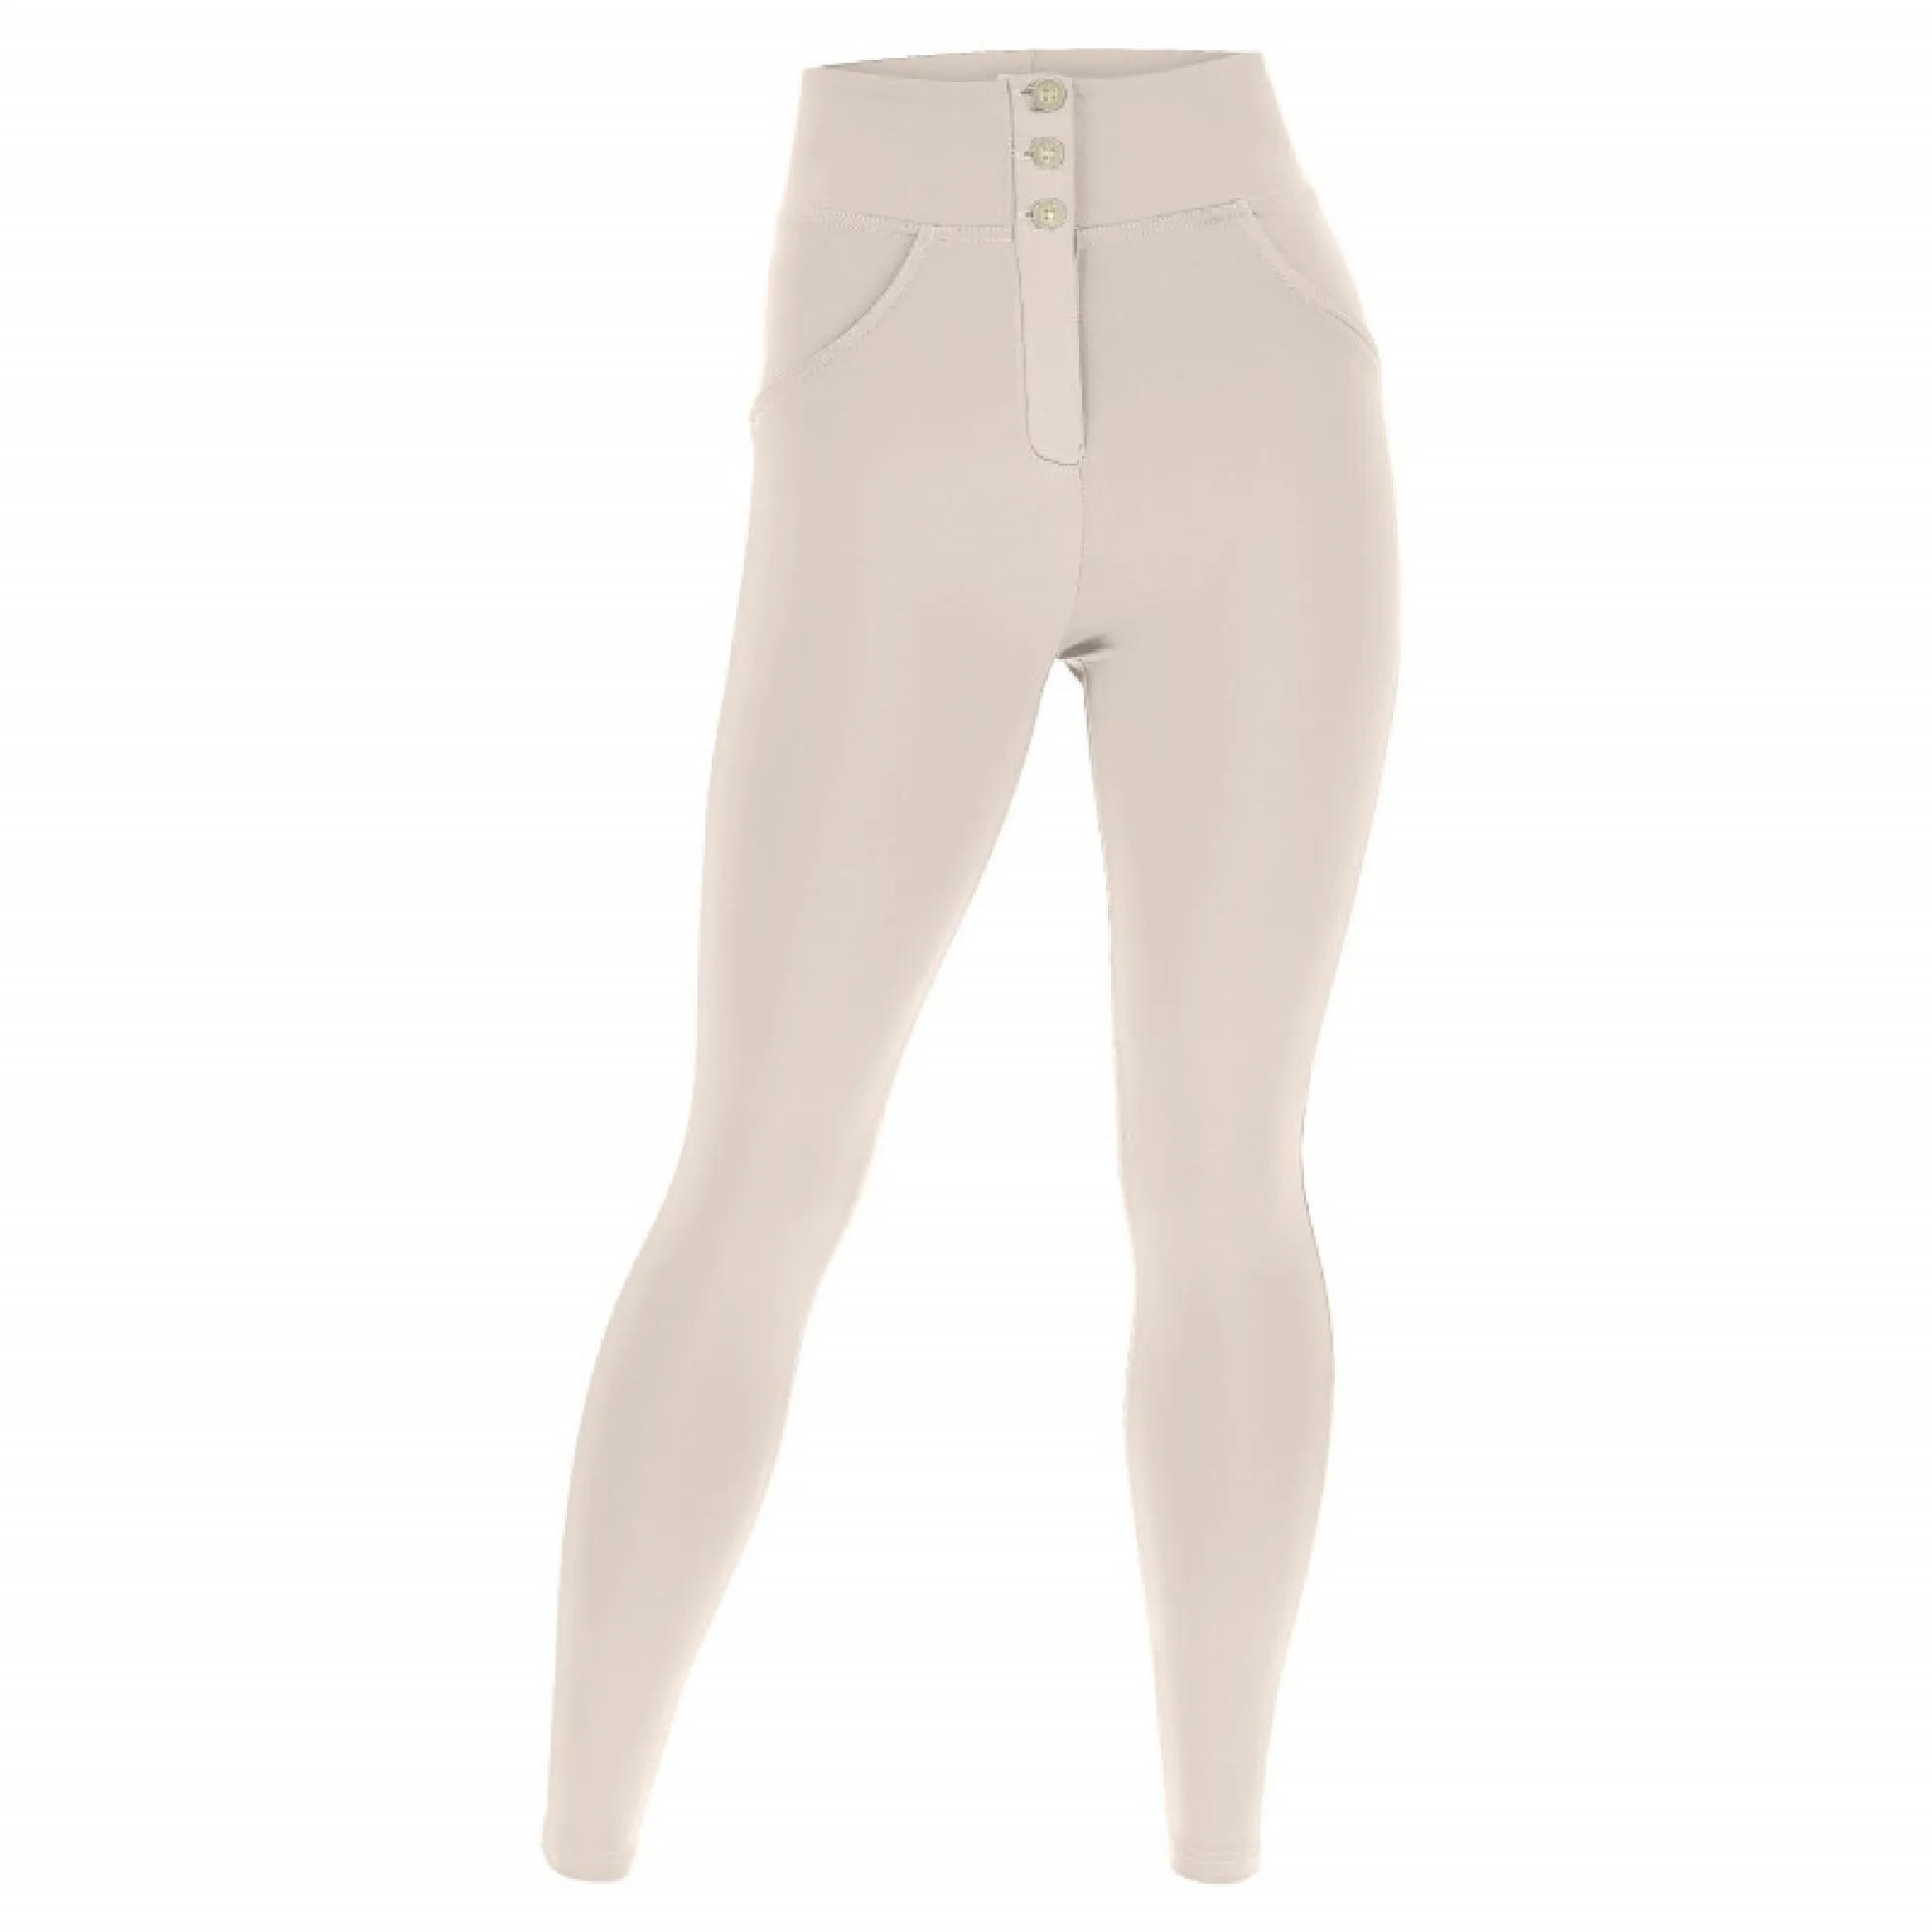 WR.UP® Eco - Buttoned High Waist Skinny - Wespentaille - Tanned Beige - Z1090